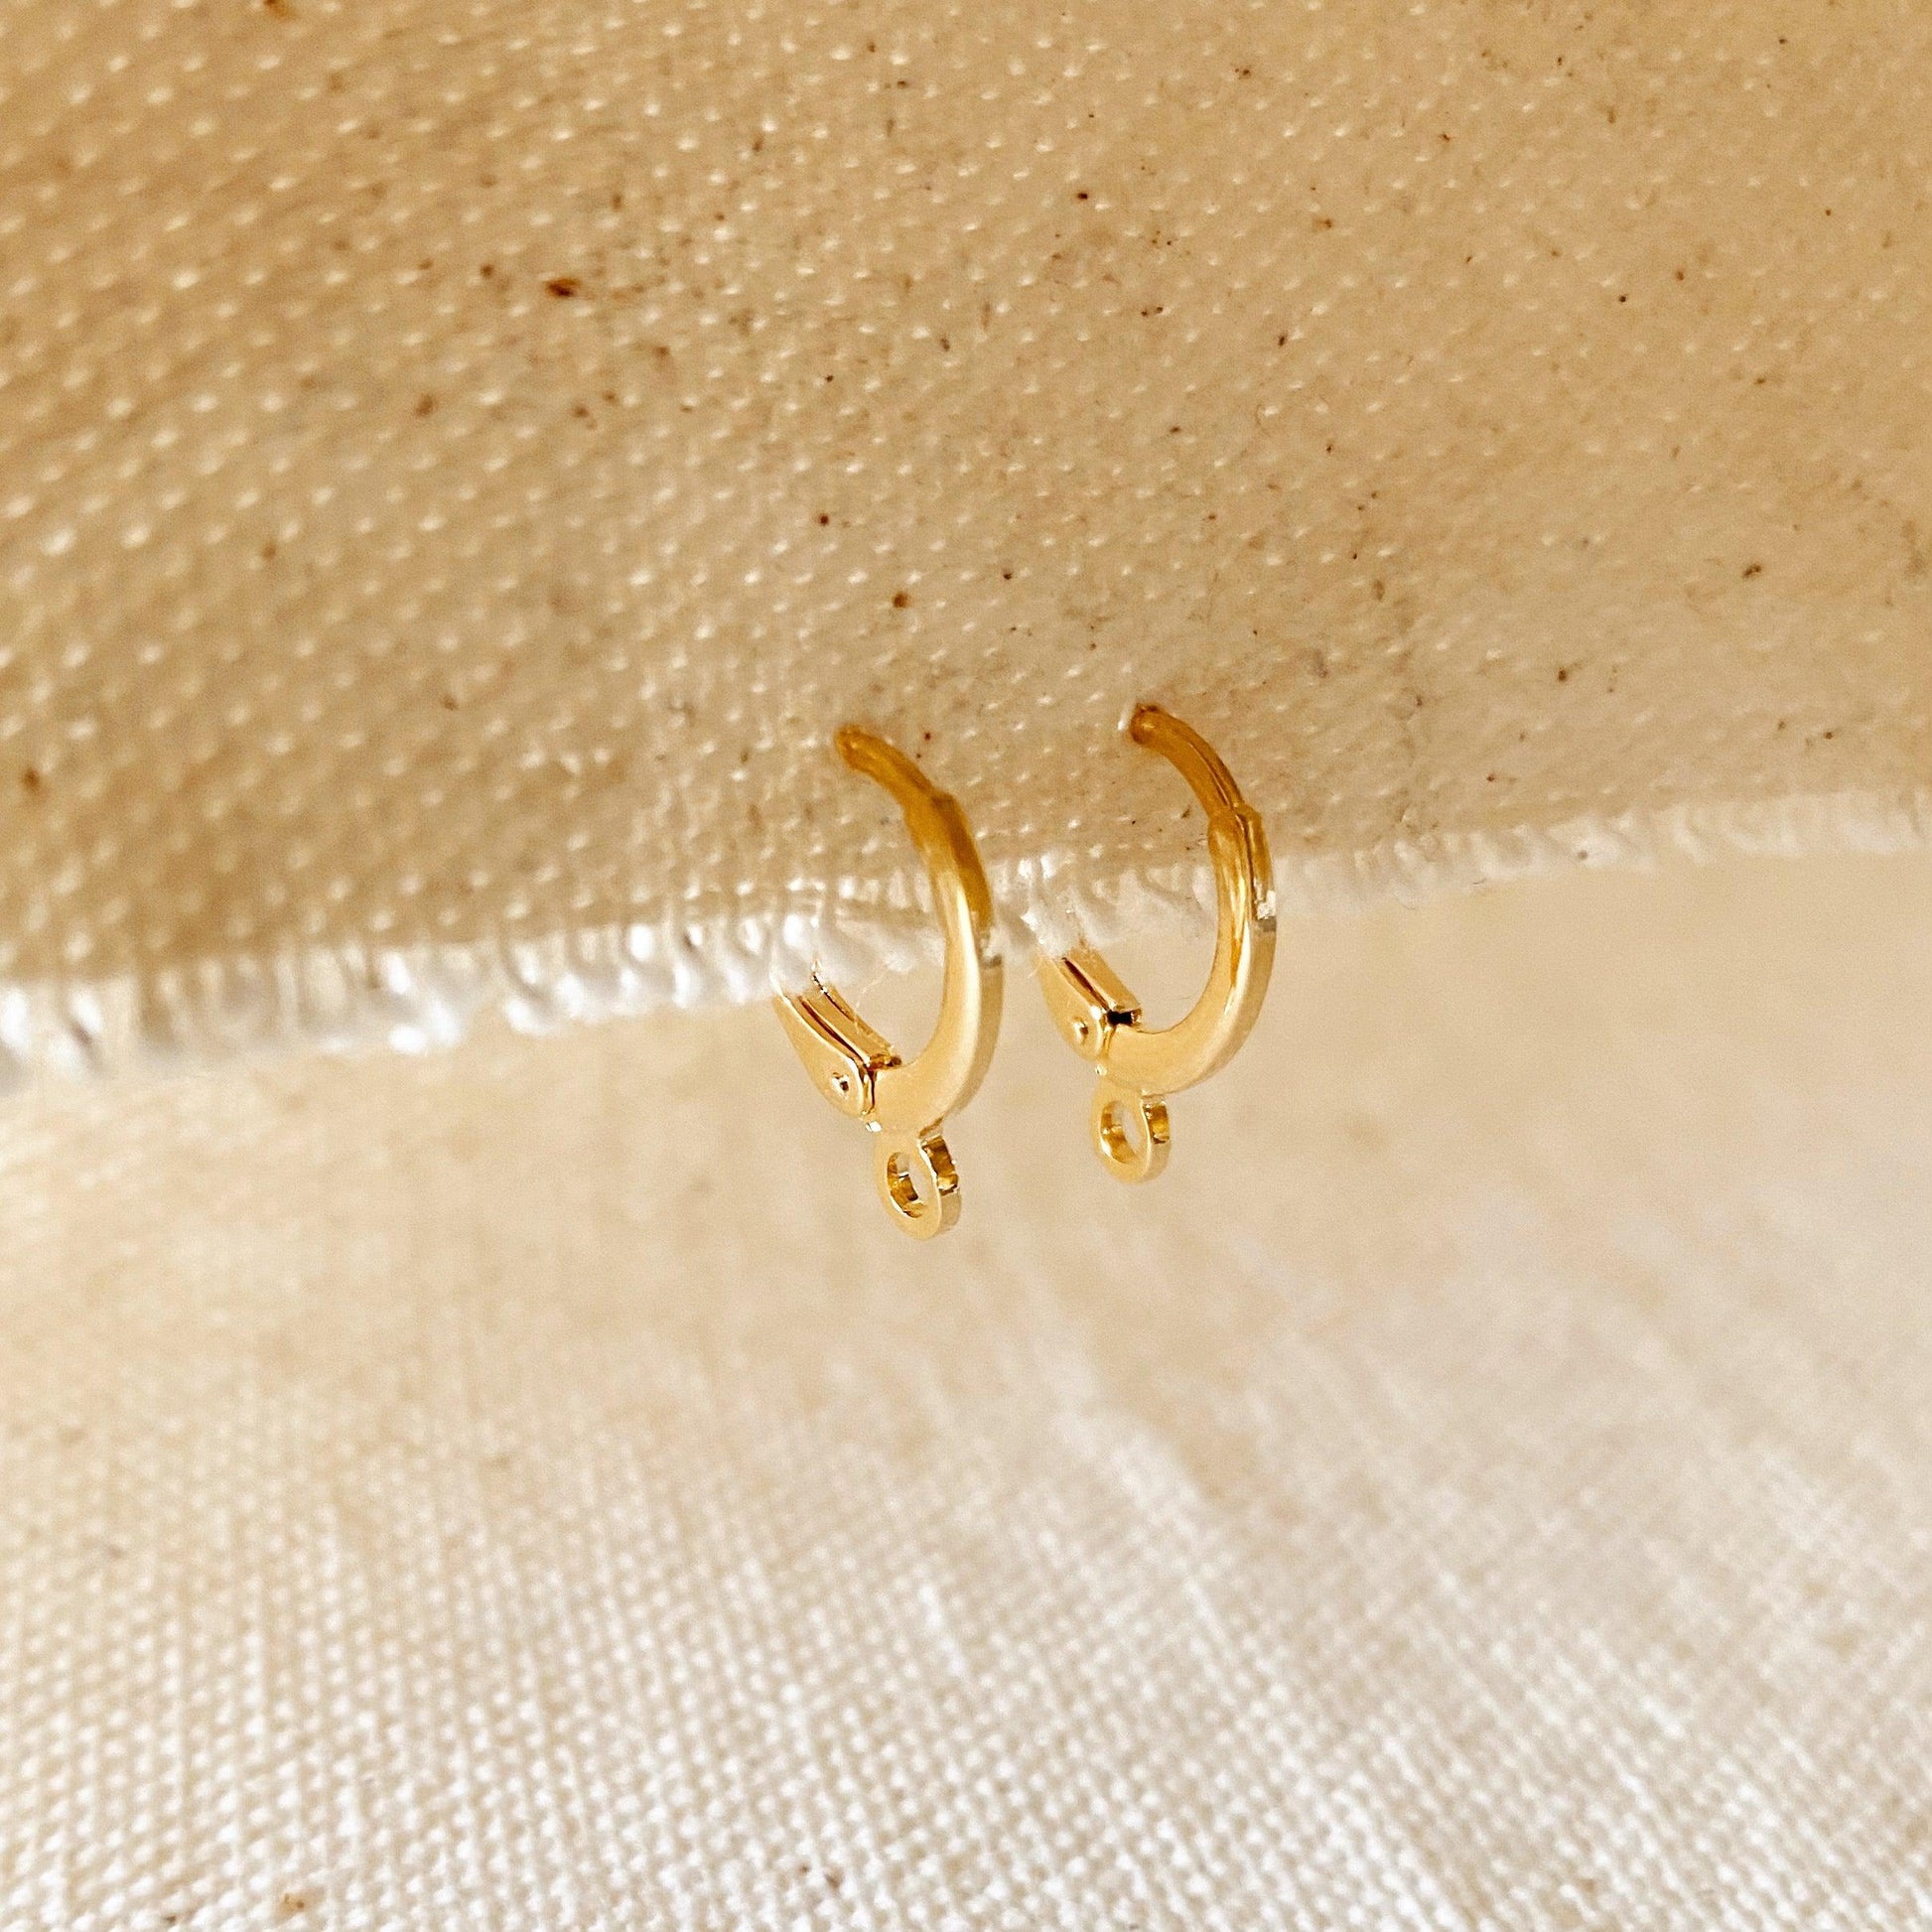 GoldFi 18k Gold Filled 12mm Lever Back Hoop Earring For Jewelry Making